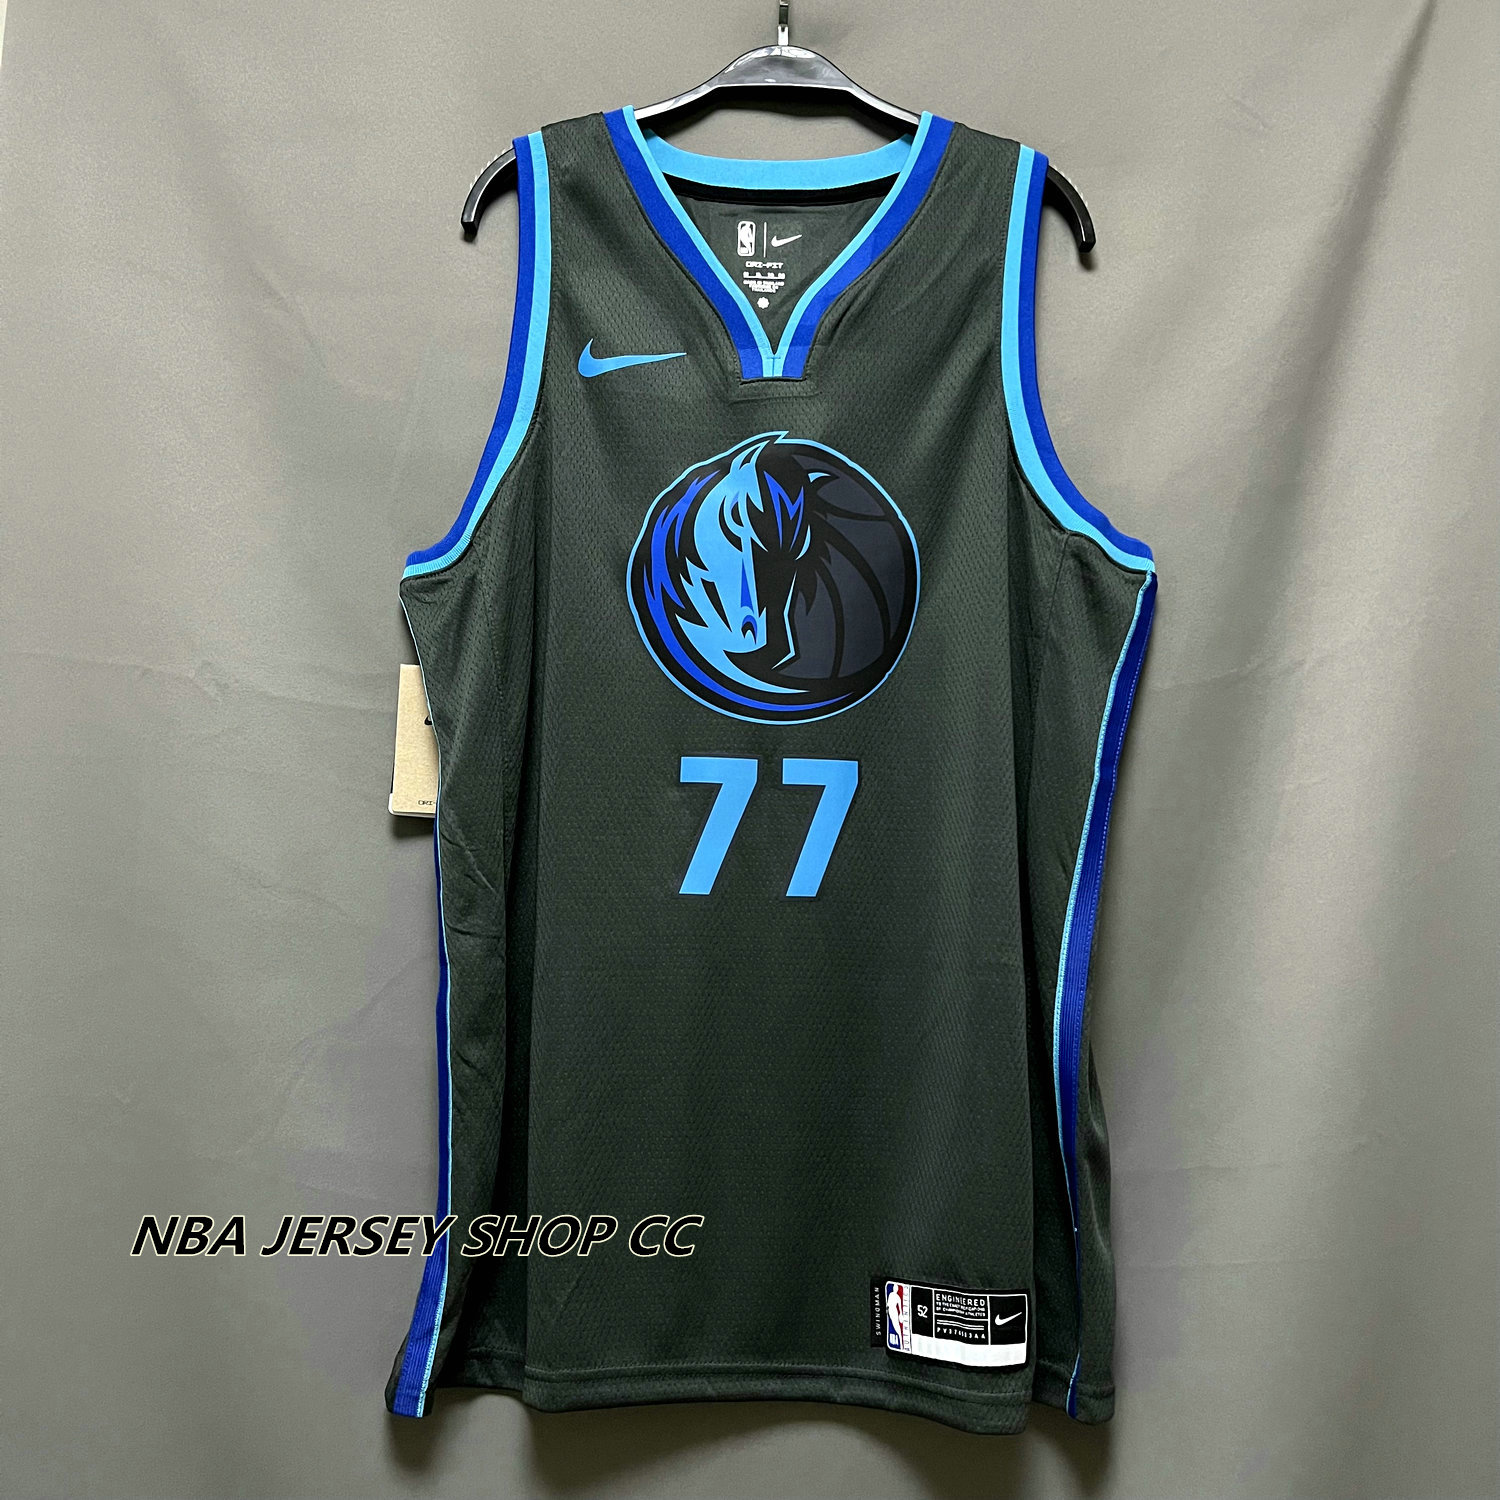 Inventory luka doncic jersey signed up on Spurs gear with the Memorial Day  particular Dallas Mavericks JERSEYS, NBA CITY JERSEYS, NBA BASKETBALL JERSEY  ,Nba Jerseys ,Mavericks T-SHIRTS Top Gun: Maverick-Dallas Mavericks JERSEYS